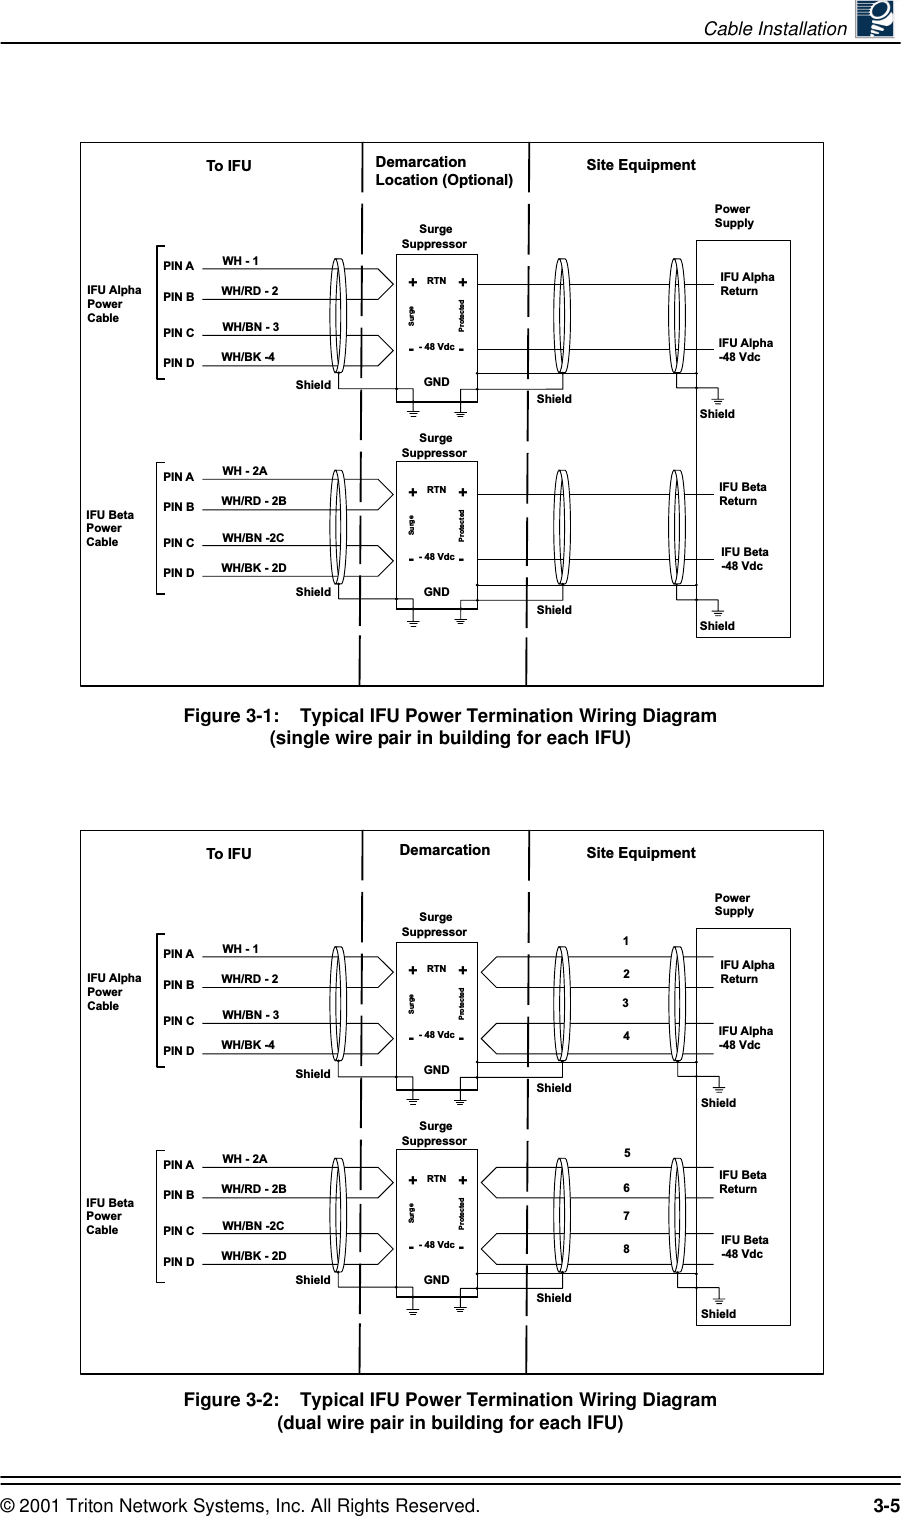 Cable Installation © 2001 Triton Network Systems, Inc. All Rights Reserved. 3-5Figure 3-1:    Typical IFU Power Termination Wiring Diagram (single wire pair in building for each IFU) Figure 3-2:    Typical IFU Power Termination Wiring Diagram (dual wire pair in building for each IFU)WH - 1IFU AlphaPowerCablePIN APIN BPIN CPIN DPIN APIN BPIN CPIN DWH/RD - 2 SurgeSuppressor SurgeSuppressorGNDIFU BetaPowerCablePowerSupplyIFU AlphaReturnSurge++--- 48 VdcRTNProtectedGNDSurge++--- 48 VdcRTNProtectedTo IFU DemarcationLocation (Optional)Site Equipment IFU BetaReturn IFU Alpha-48 VdcIFU Beta-48 VdcWH/BN - 3WH/BK -4WH - 2AWH/RD - 2BWH/BN -2CWH/BK - 2DShieldShieldShieldShieldShieldShieldWH - 1IFU AlphaPowerCablePIN APIN BPIN CPIN DPIN APIN BPIN CPIN DWH/RD - 2 SurgeSuppressor SurgeSuppressorGNDIFU BetaPowerCablePowerSupplyIFU AlphaReturnSurge++--- 48 VdcRTNProtectedGNDSurge++--- 48 VdcRTNProtectedTo IFU Demarcation Site Equipment IFU BetaReturn IFU Alpha-48 VdcIFU Beta-48 Vdc12348765WH/BN - 3WH/BK -4WH - 2AWH/RD - 2BWH/BN -2CWH/BK - 2DShieldShieldShieldShieldShieldShield